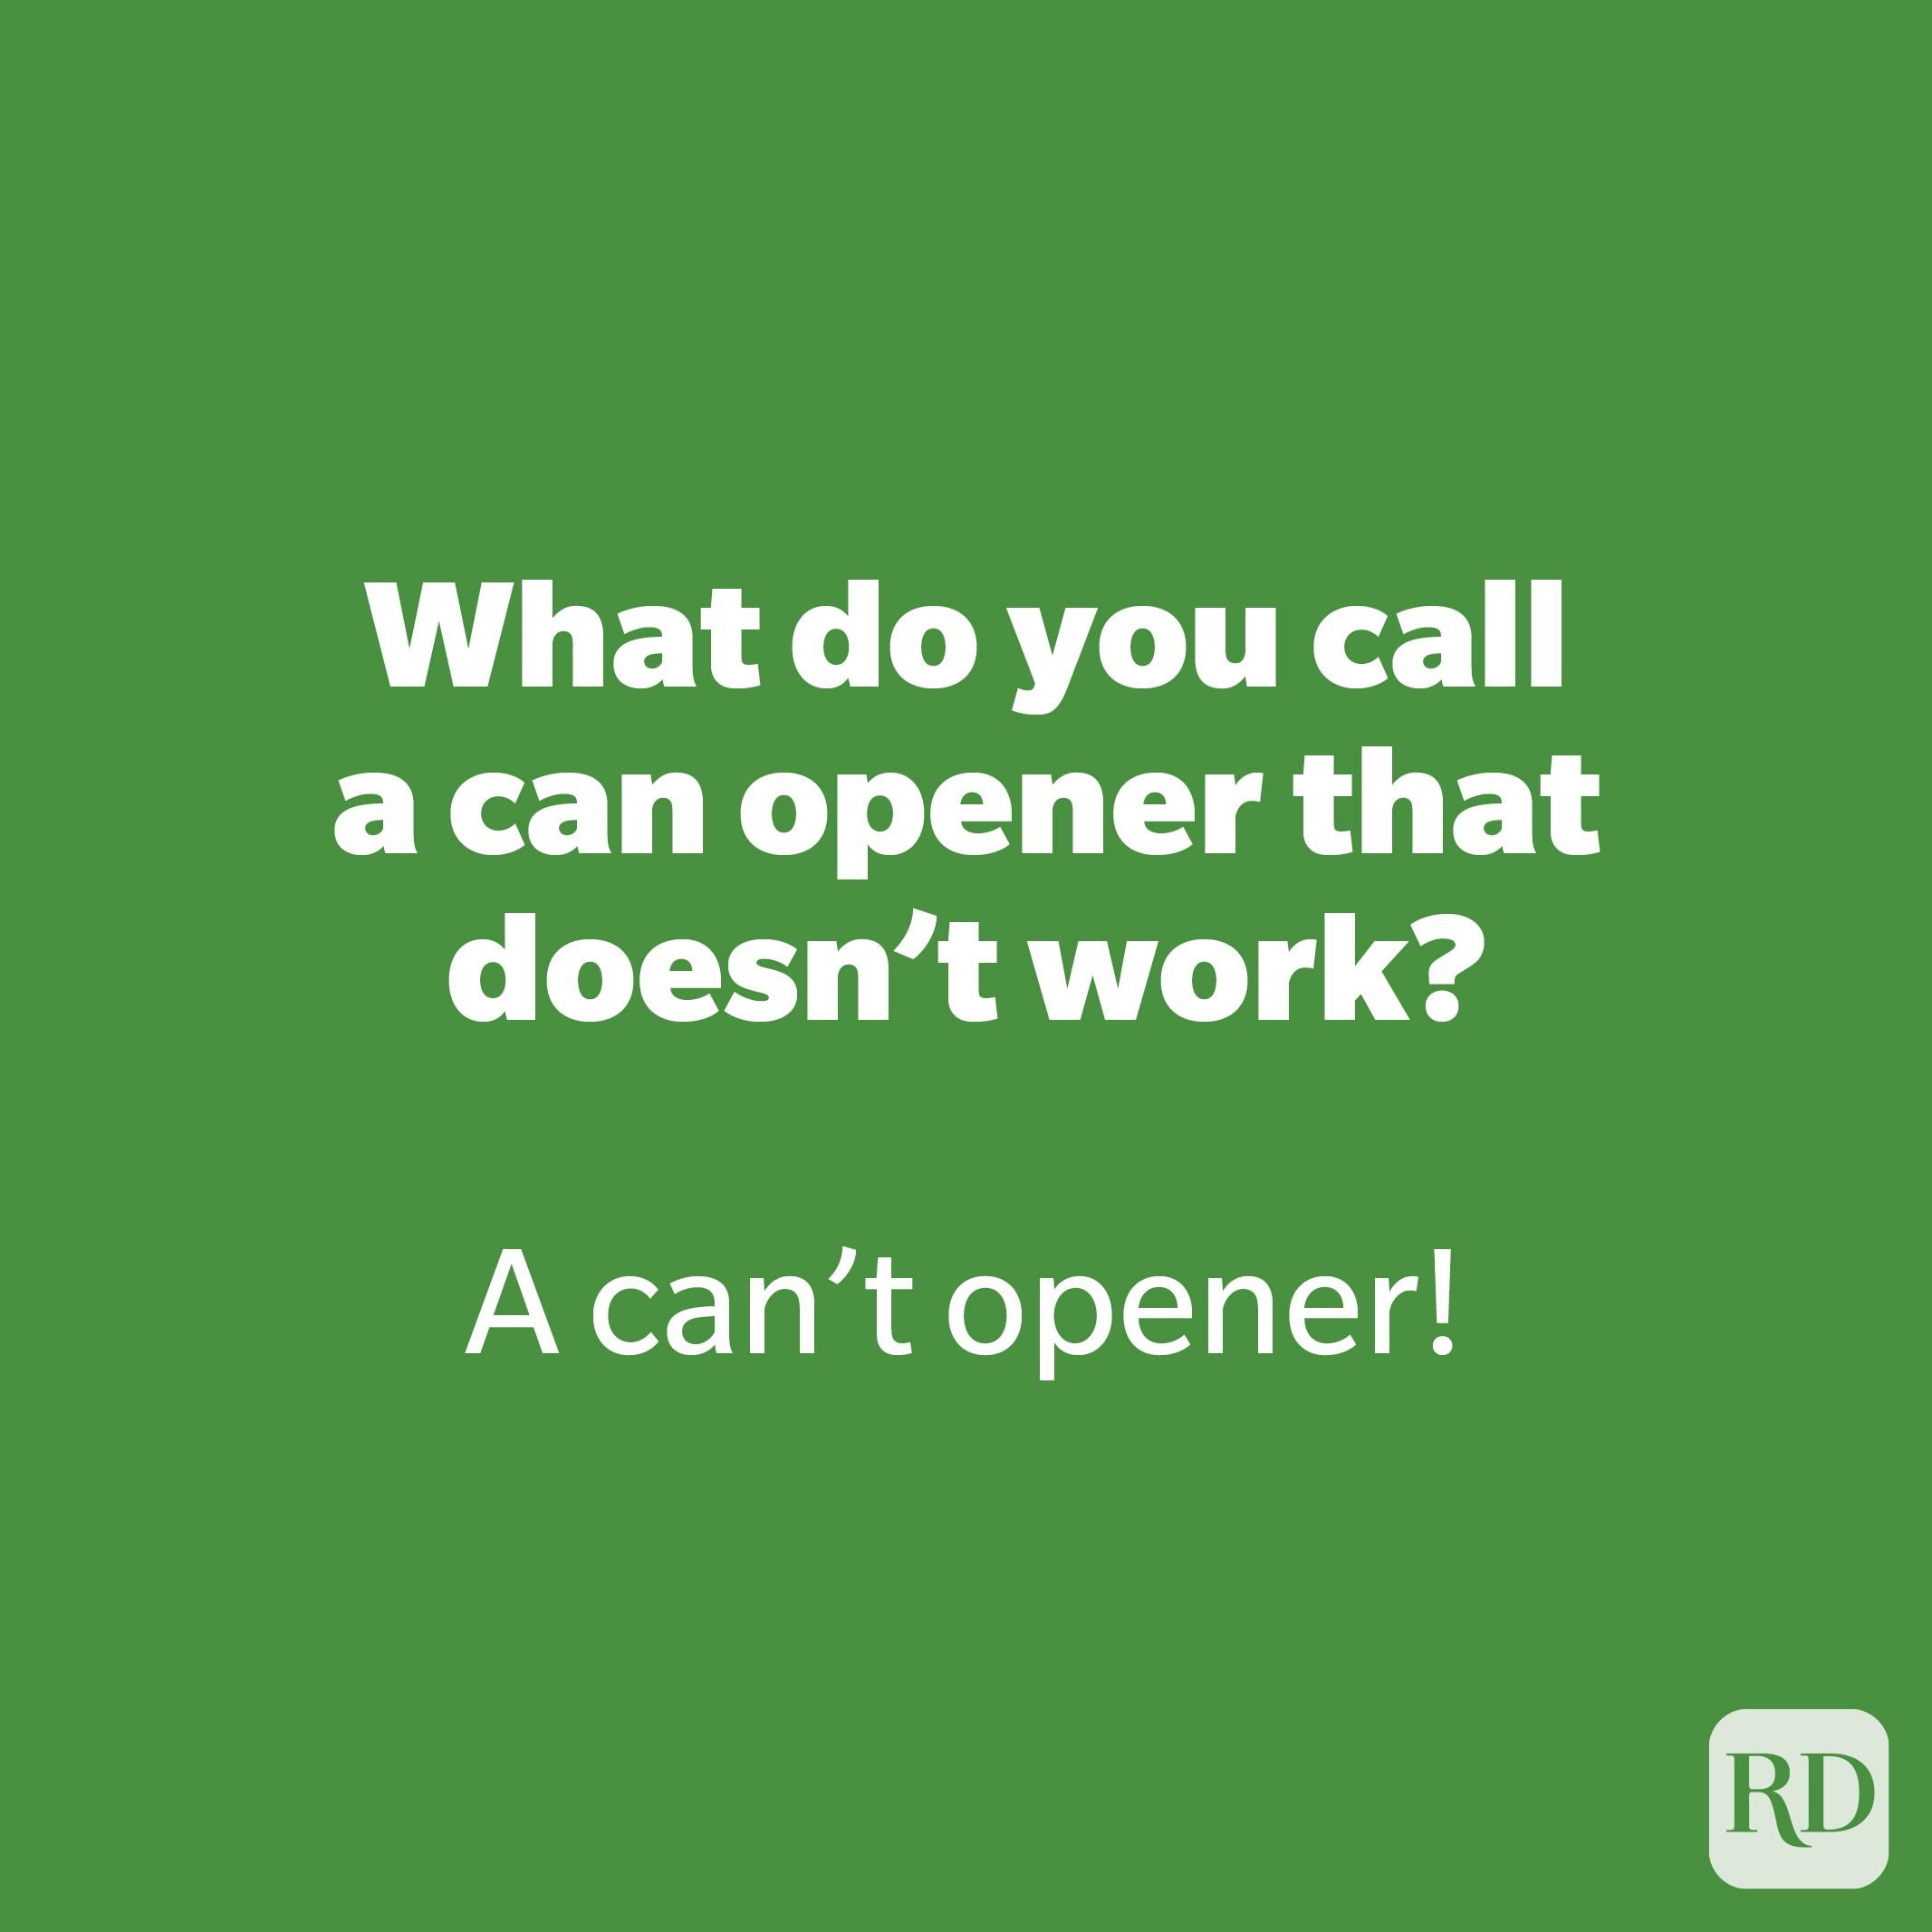 What do you call a can opener that doesn’t work?